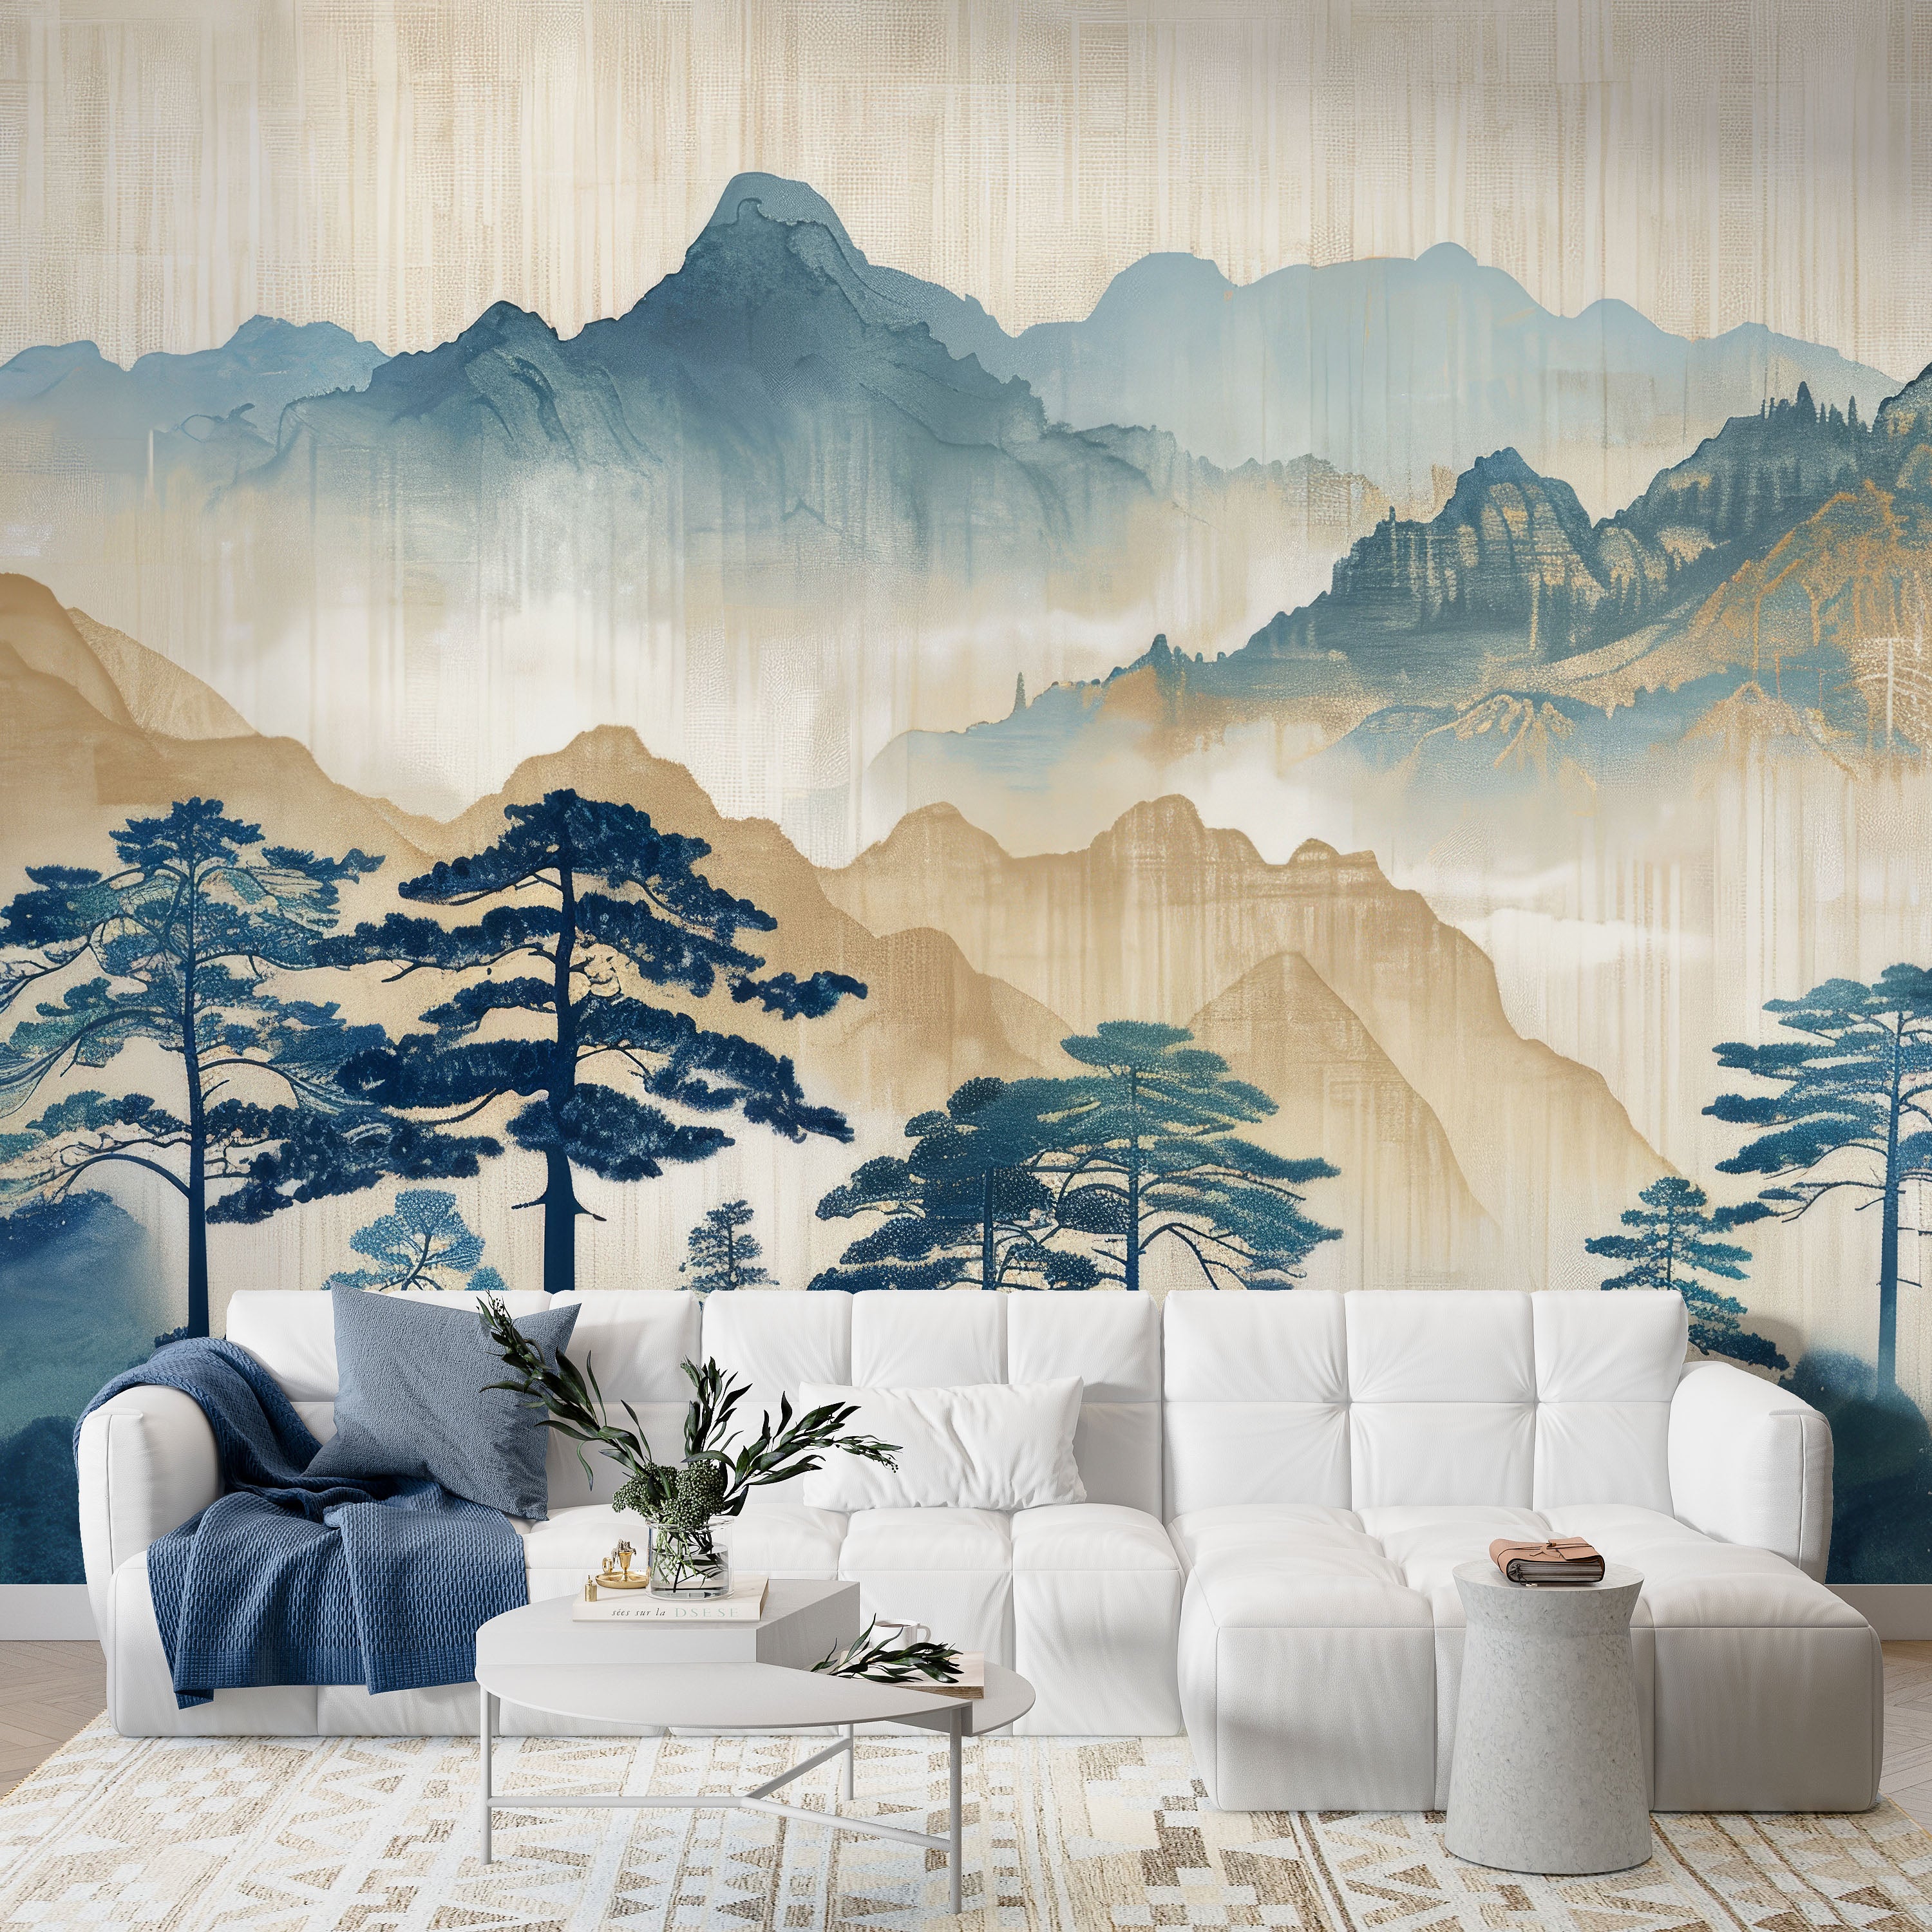 Asian escape: Silhouettes of Mountains and Forest